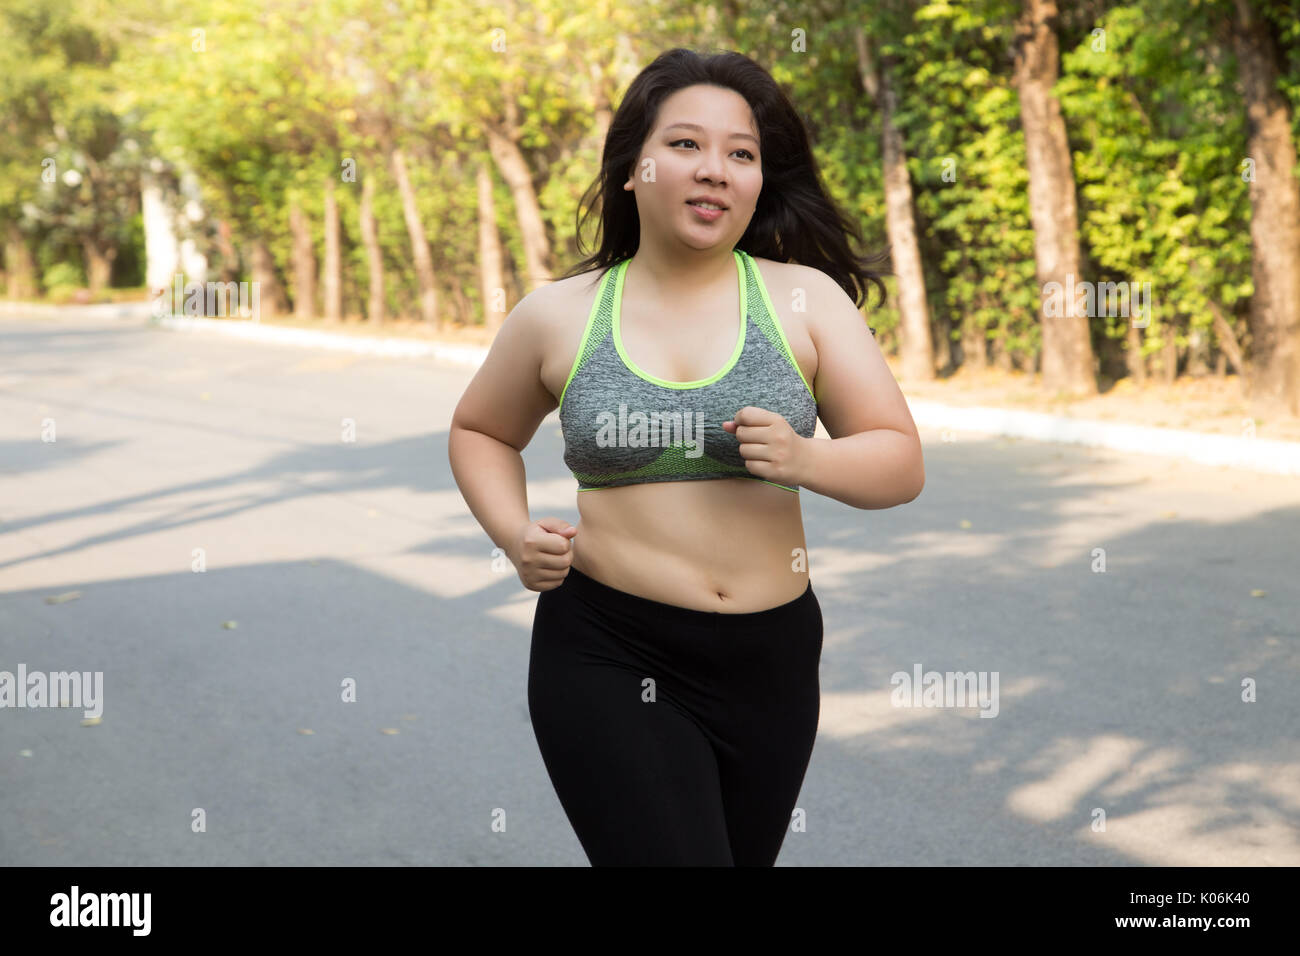 Fat woman running exercise smile face in park weight loss concept Stock Photo